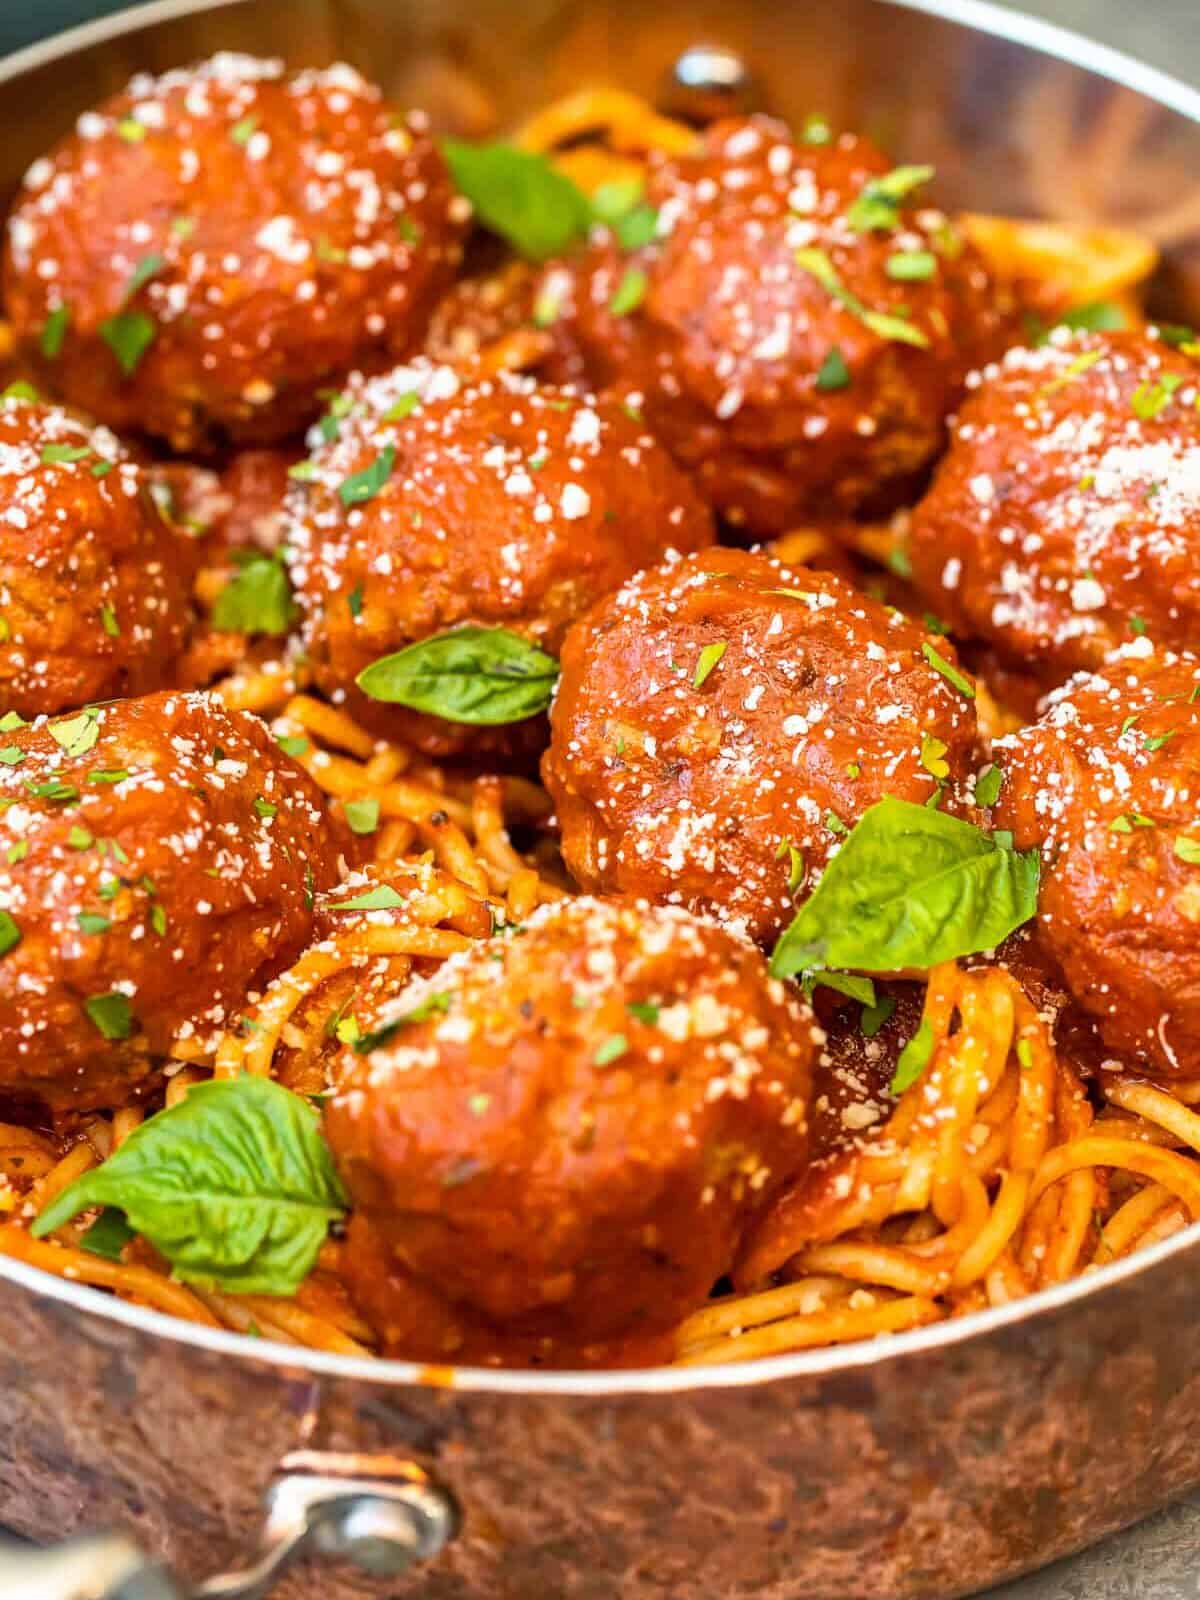 meatballs over pasta in a pan - how to make meatballs.